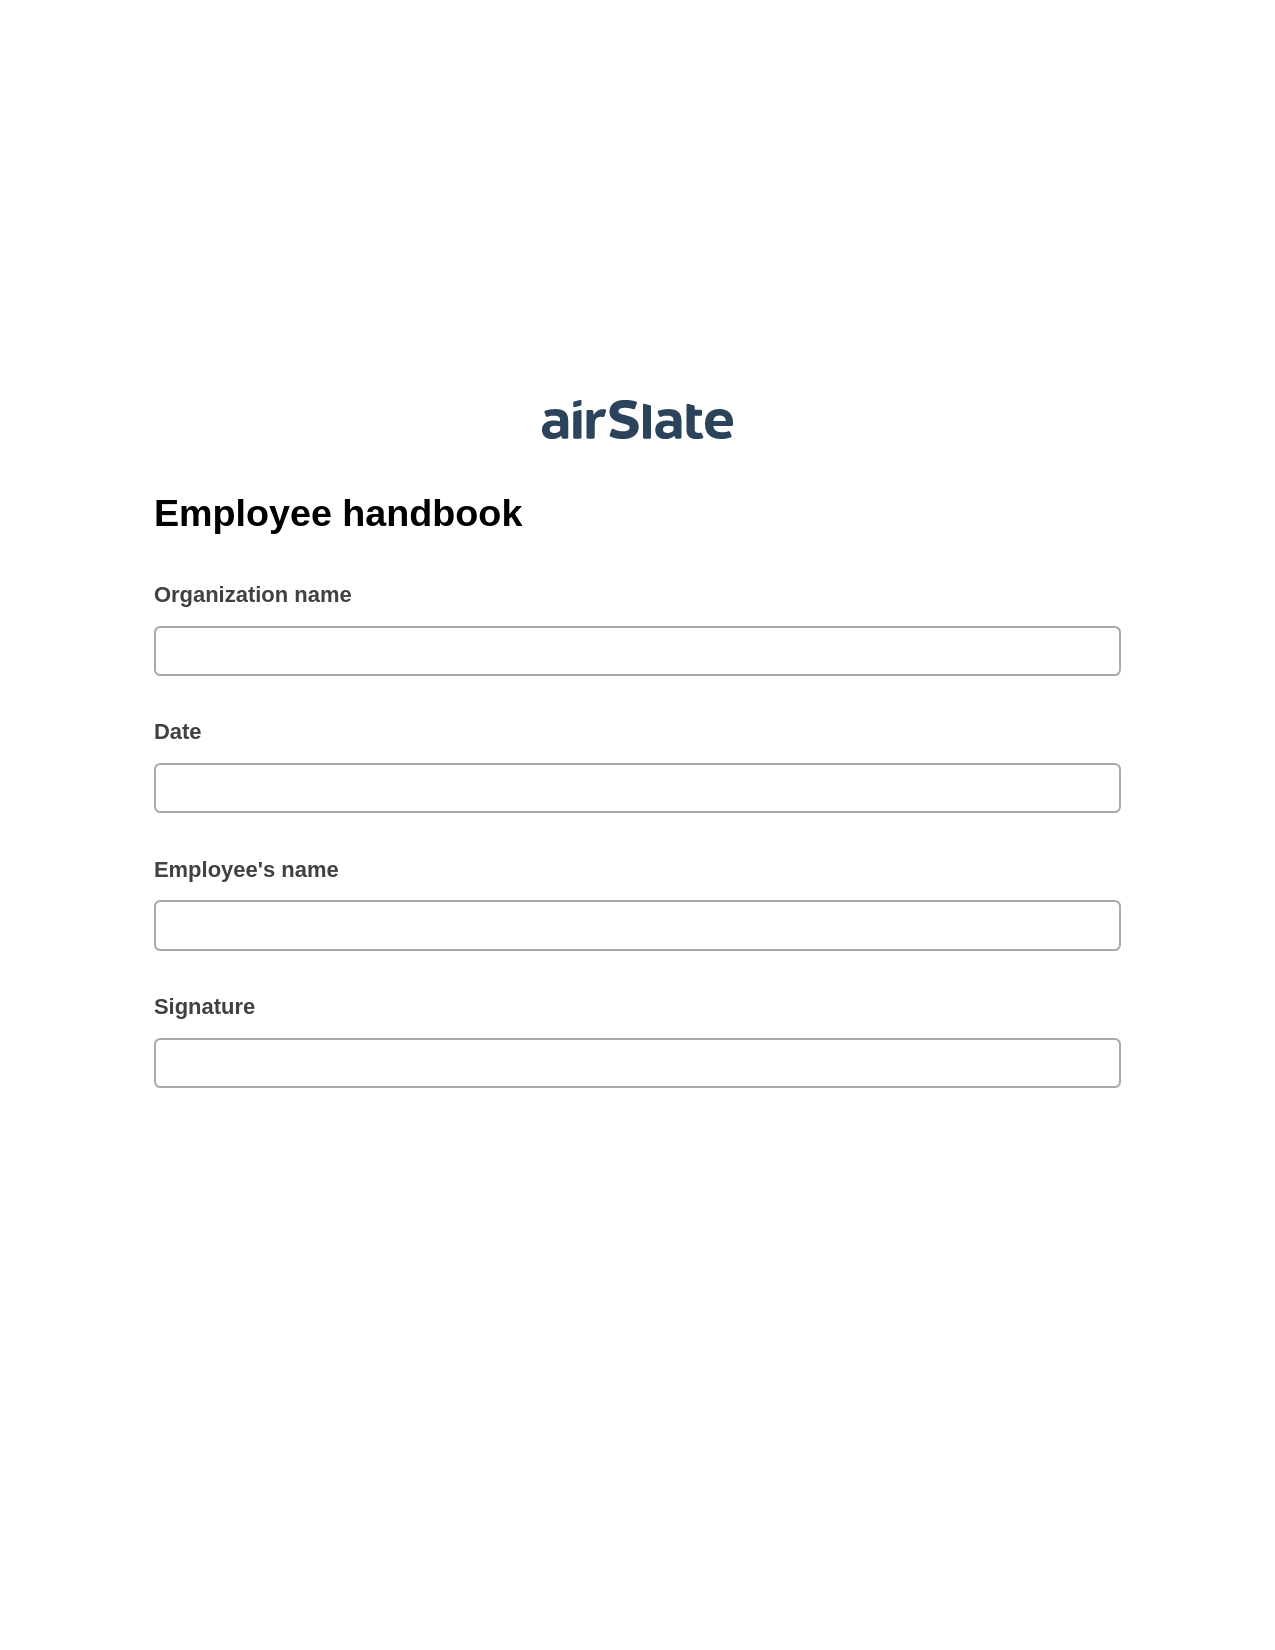 Multirole Employee handbook Pre-fill from another Slate Bot, Create Salesforce Record Bot, Post-finish Document Bot